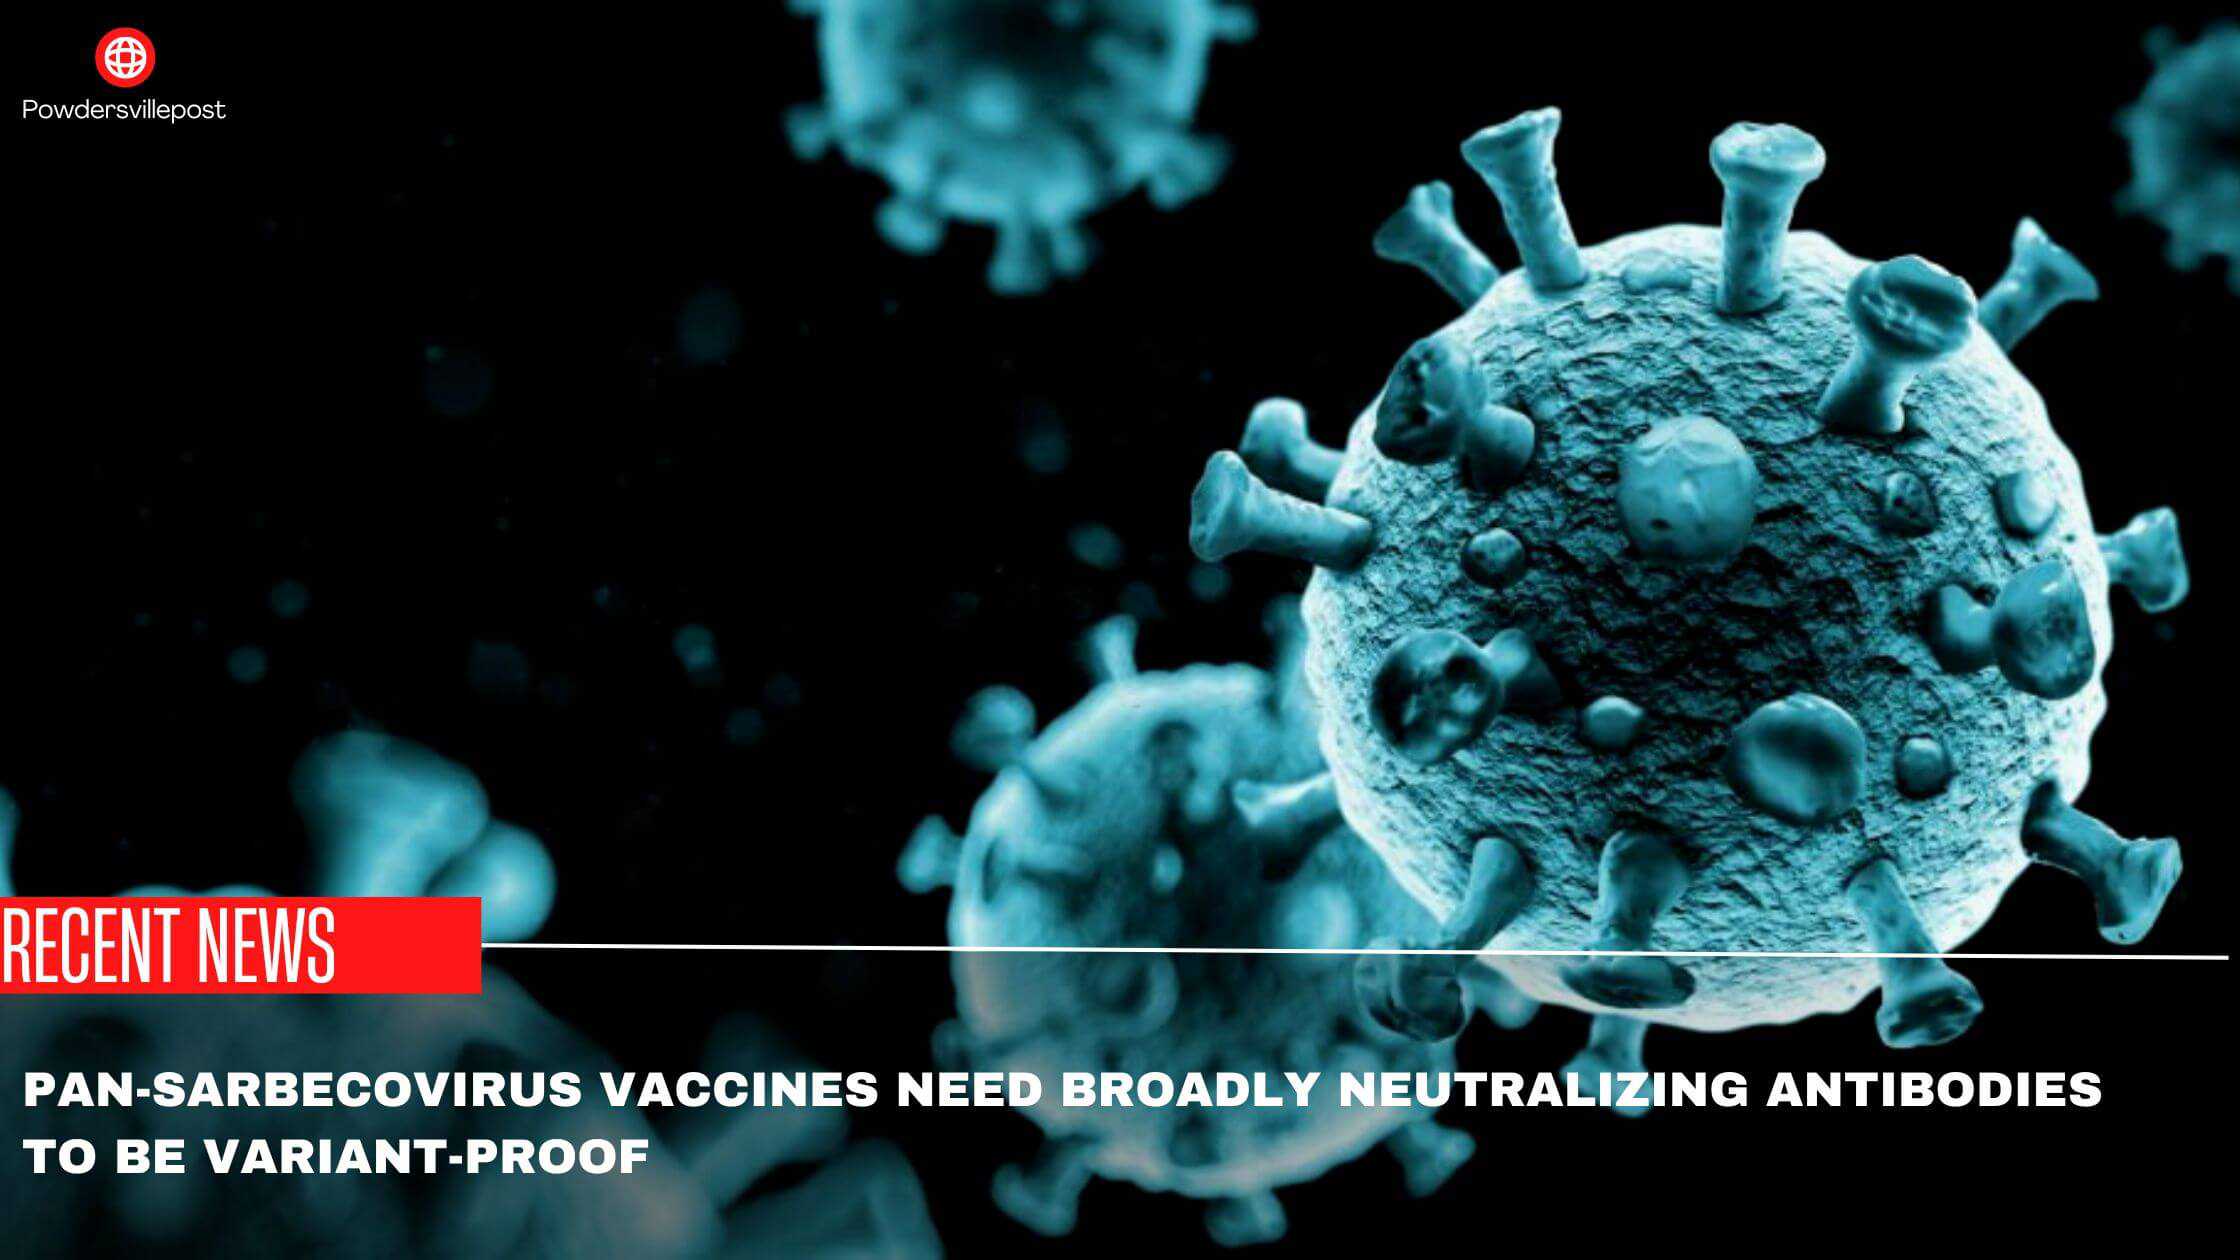 Pan-Sarbecovirus Vaccines Need Broadly Neutralizing Antibodies To Be Variant-Proof